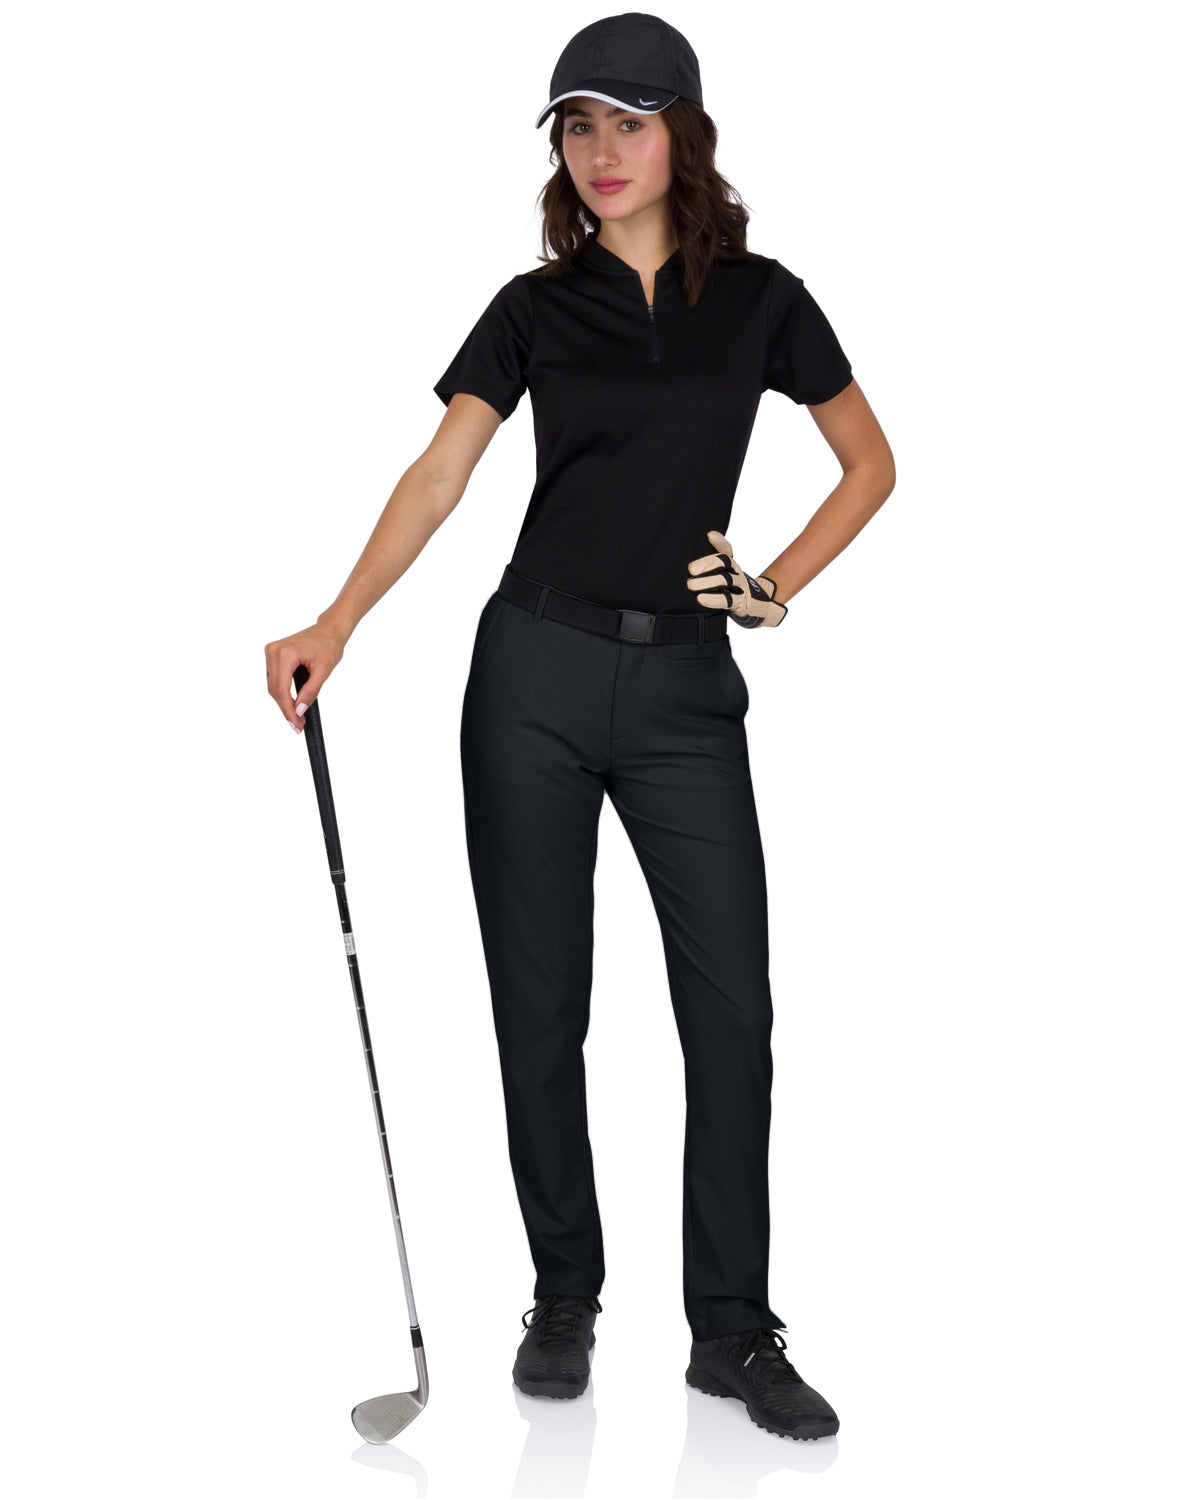  ZUTY Women's Golf Pants Lightweight Quick Dry Hiking Work Ankle  Dress Pants Casual Stretch Lounge Business Travel Black S : Clothing, Shoes  & Jewelry